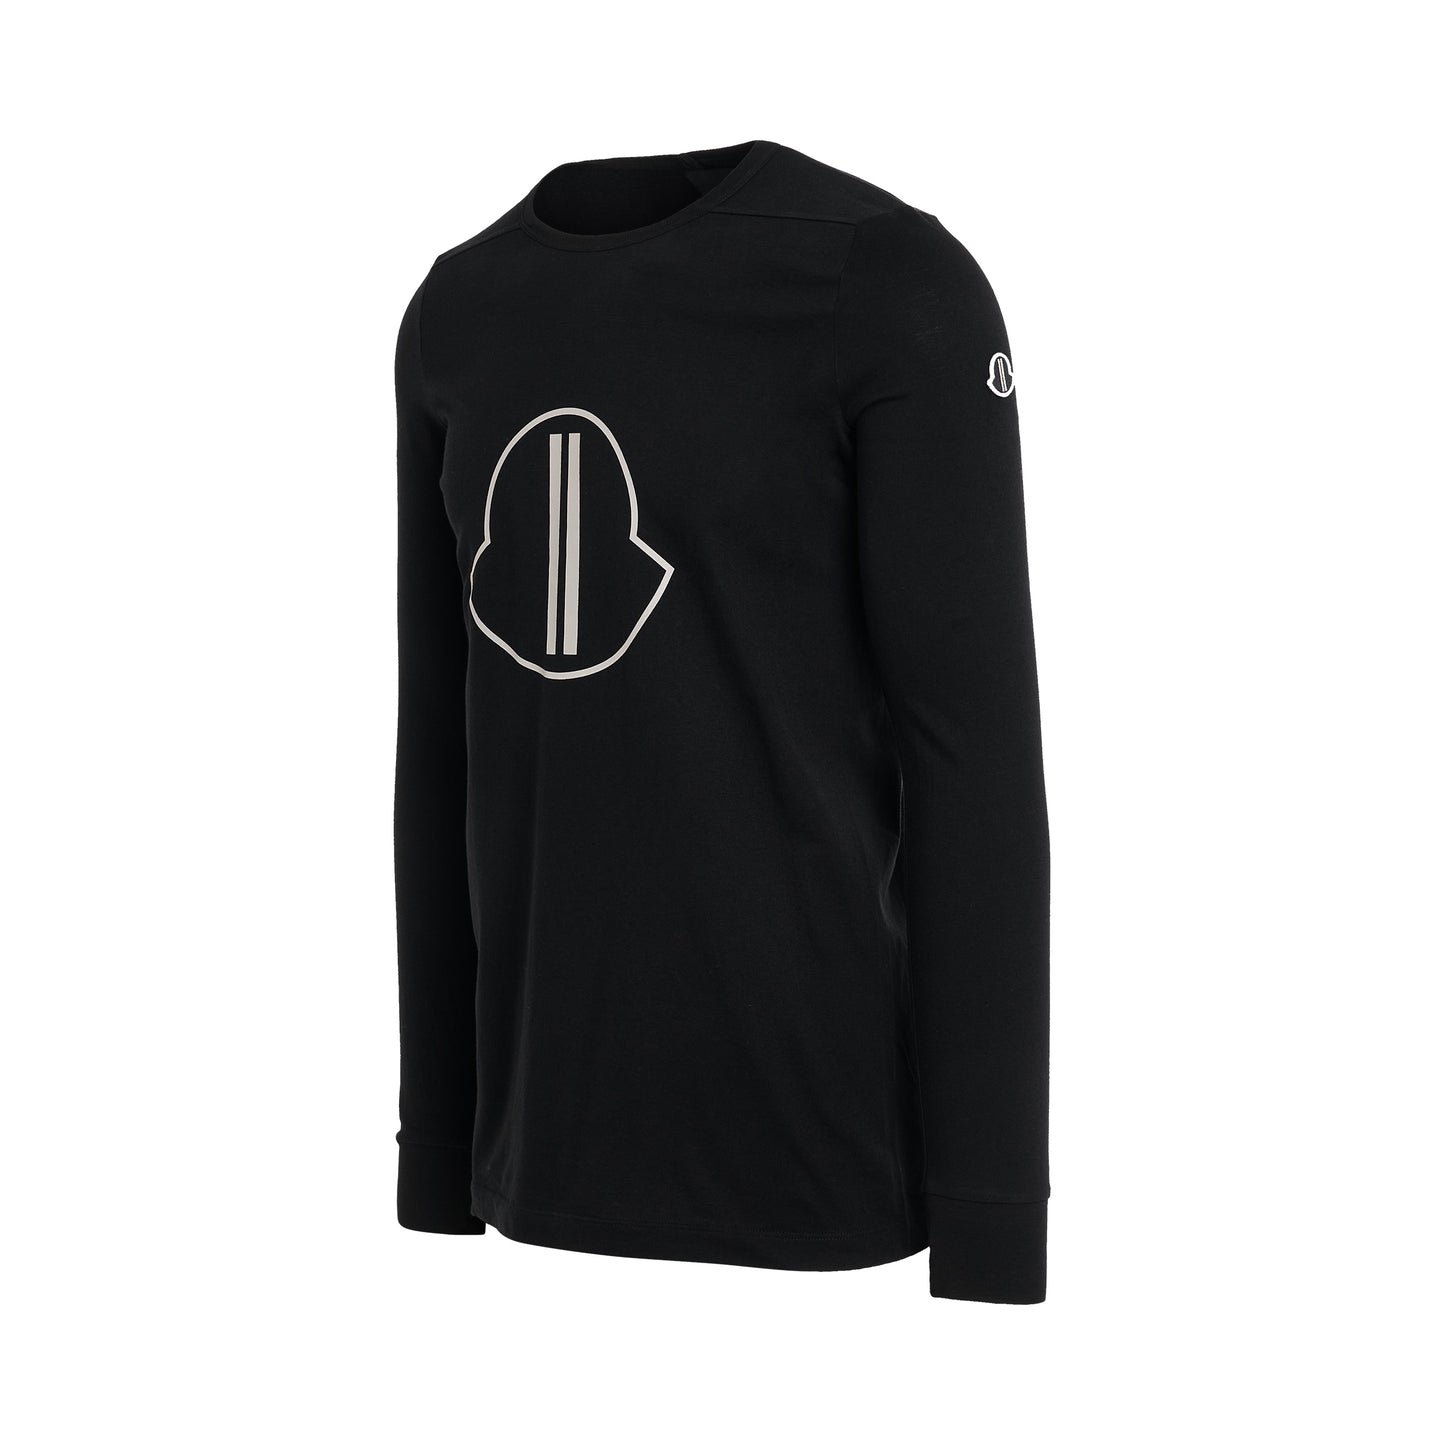 Moncler x Rick Owens Level T Long Sleeve T-Shirt in Black